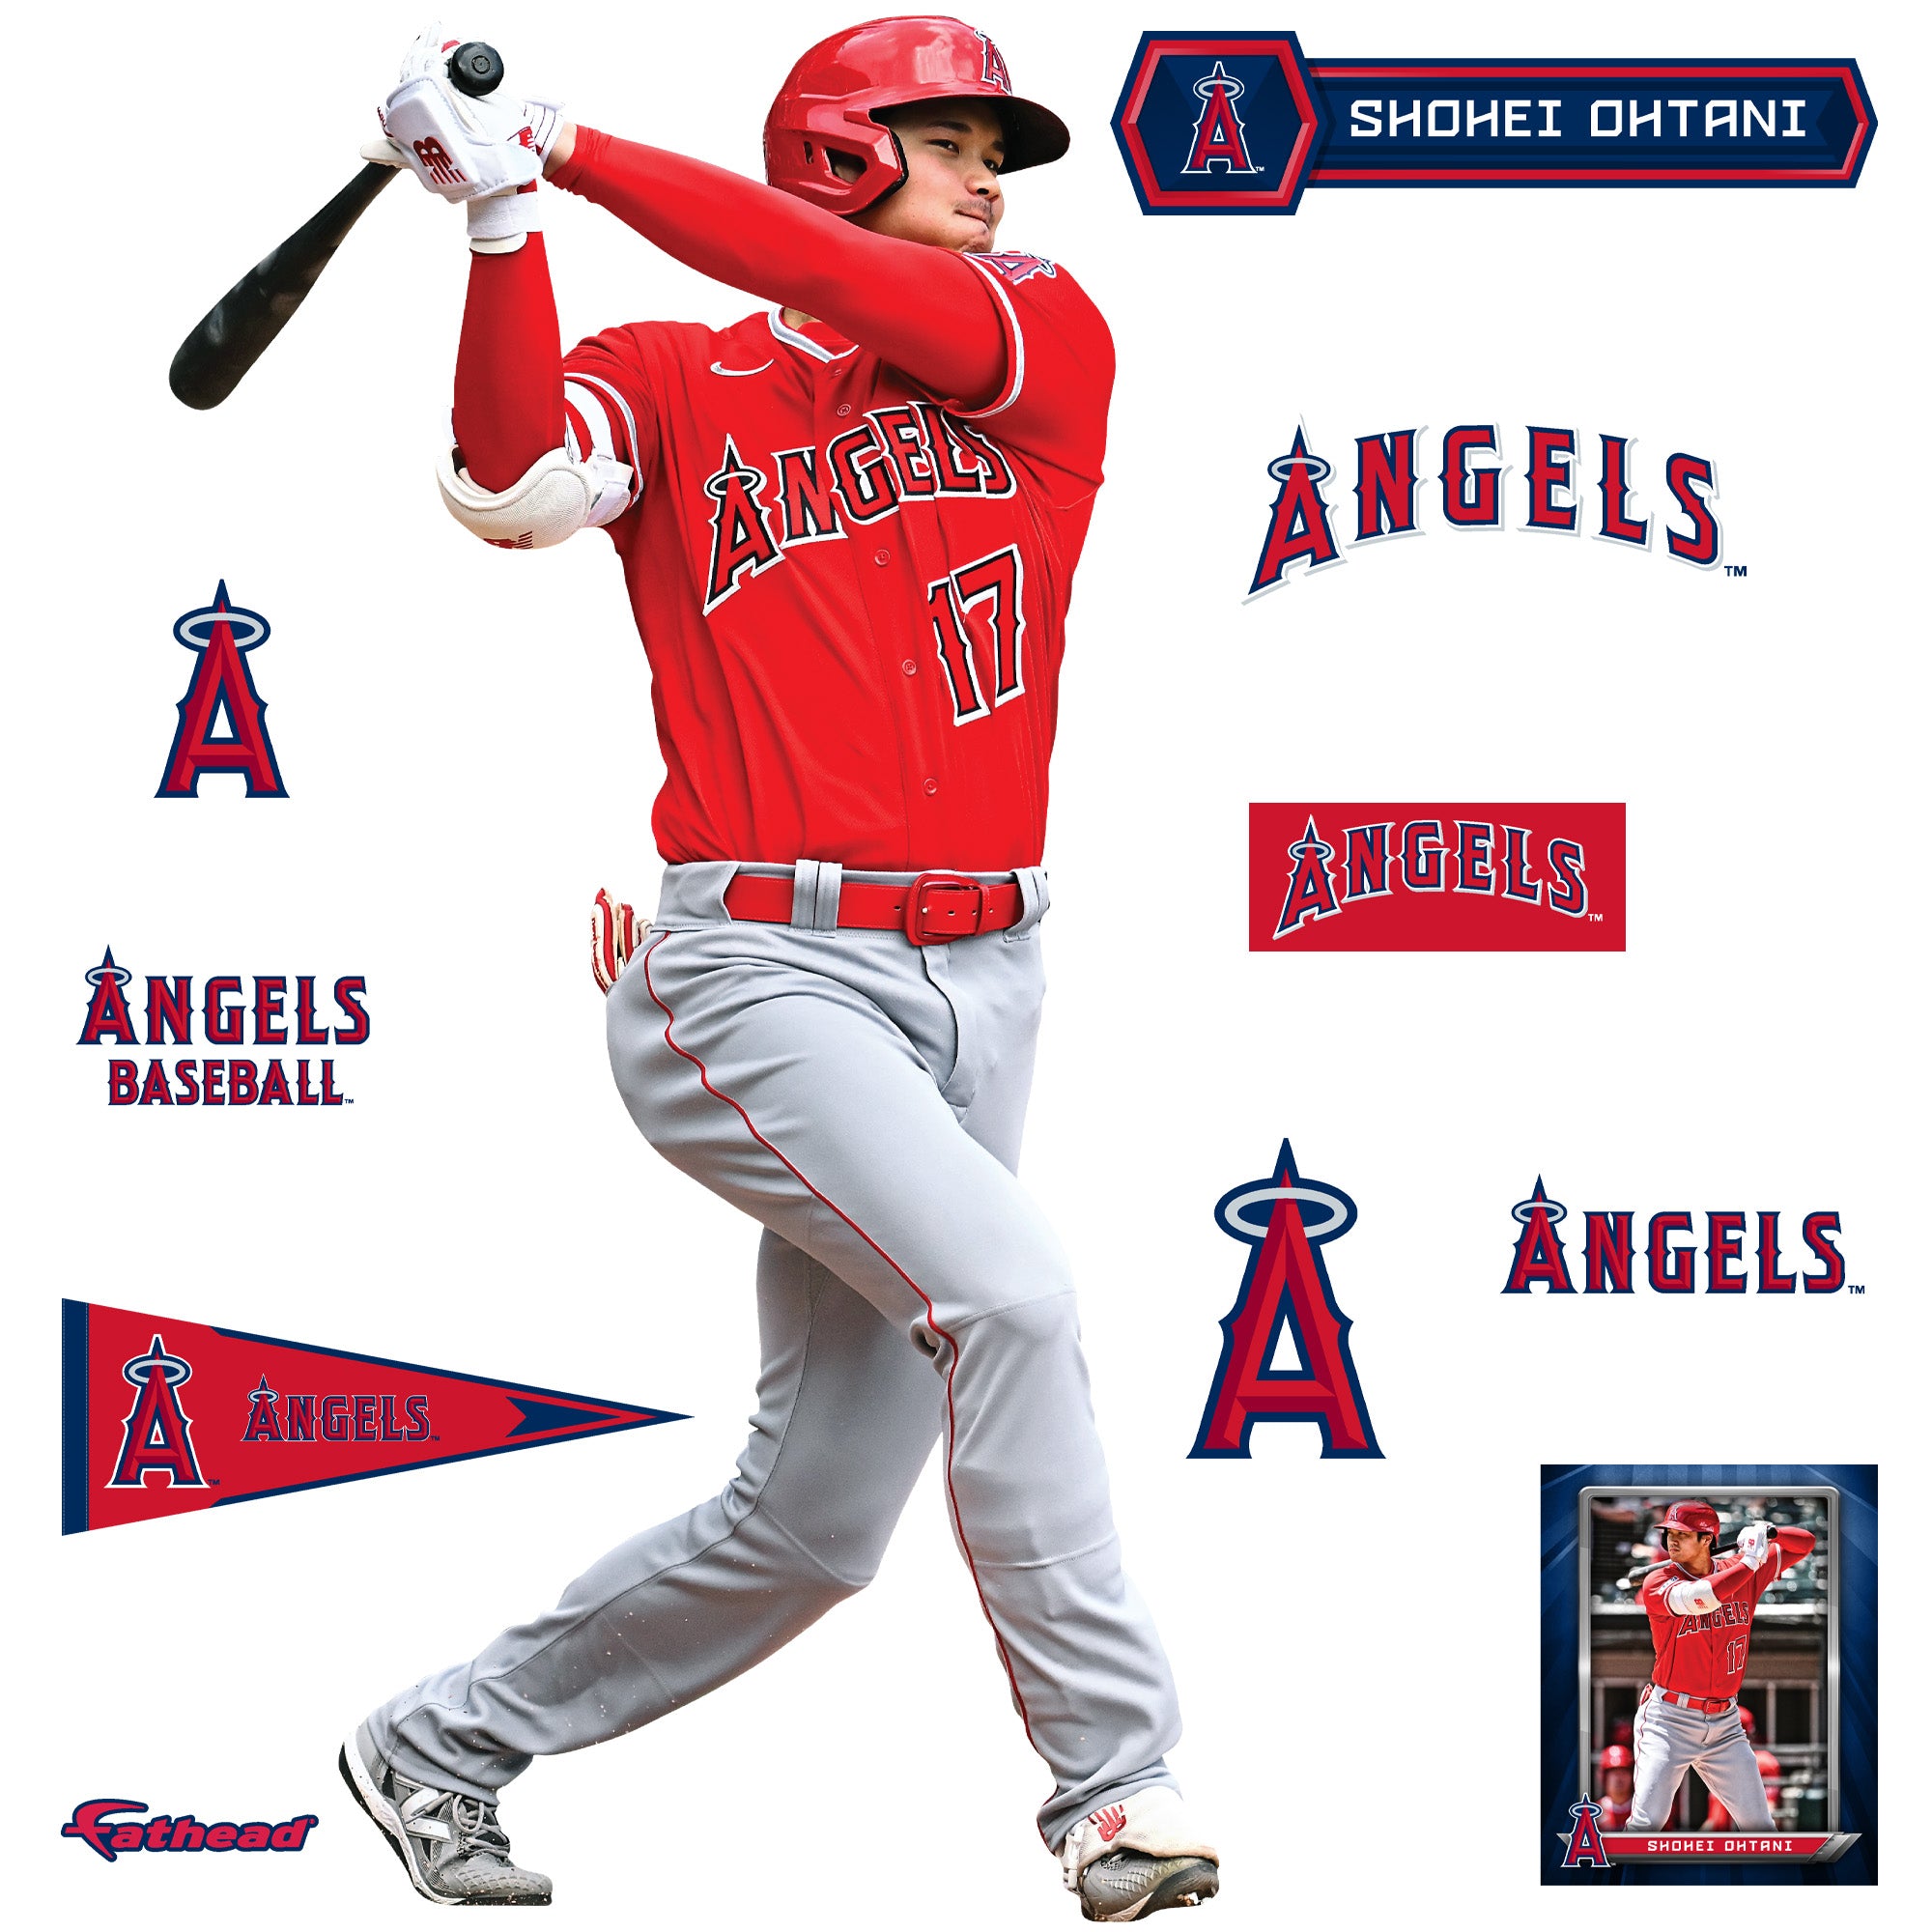 Los Angeles Angels: Shohei Ohtani - Officially Licensed MLB